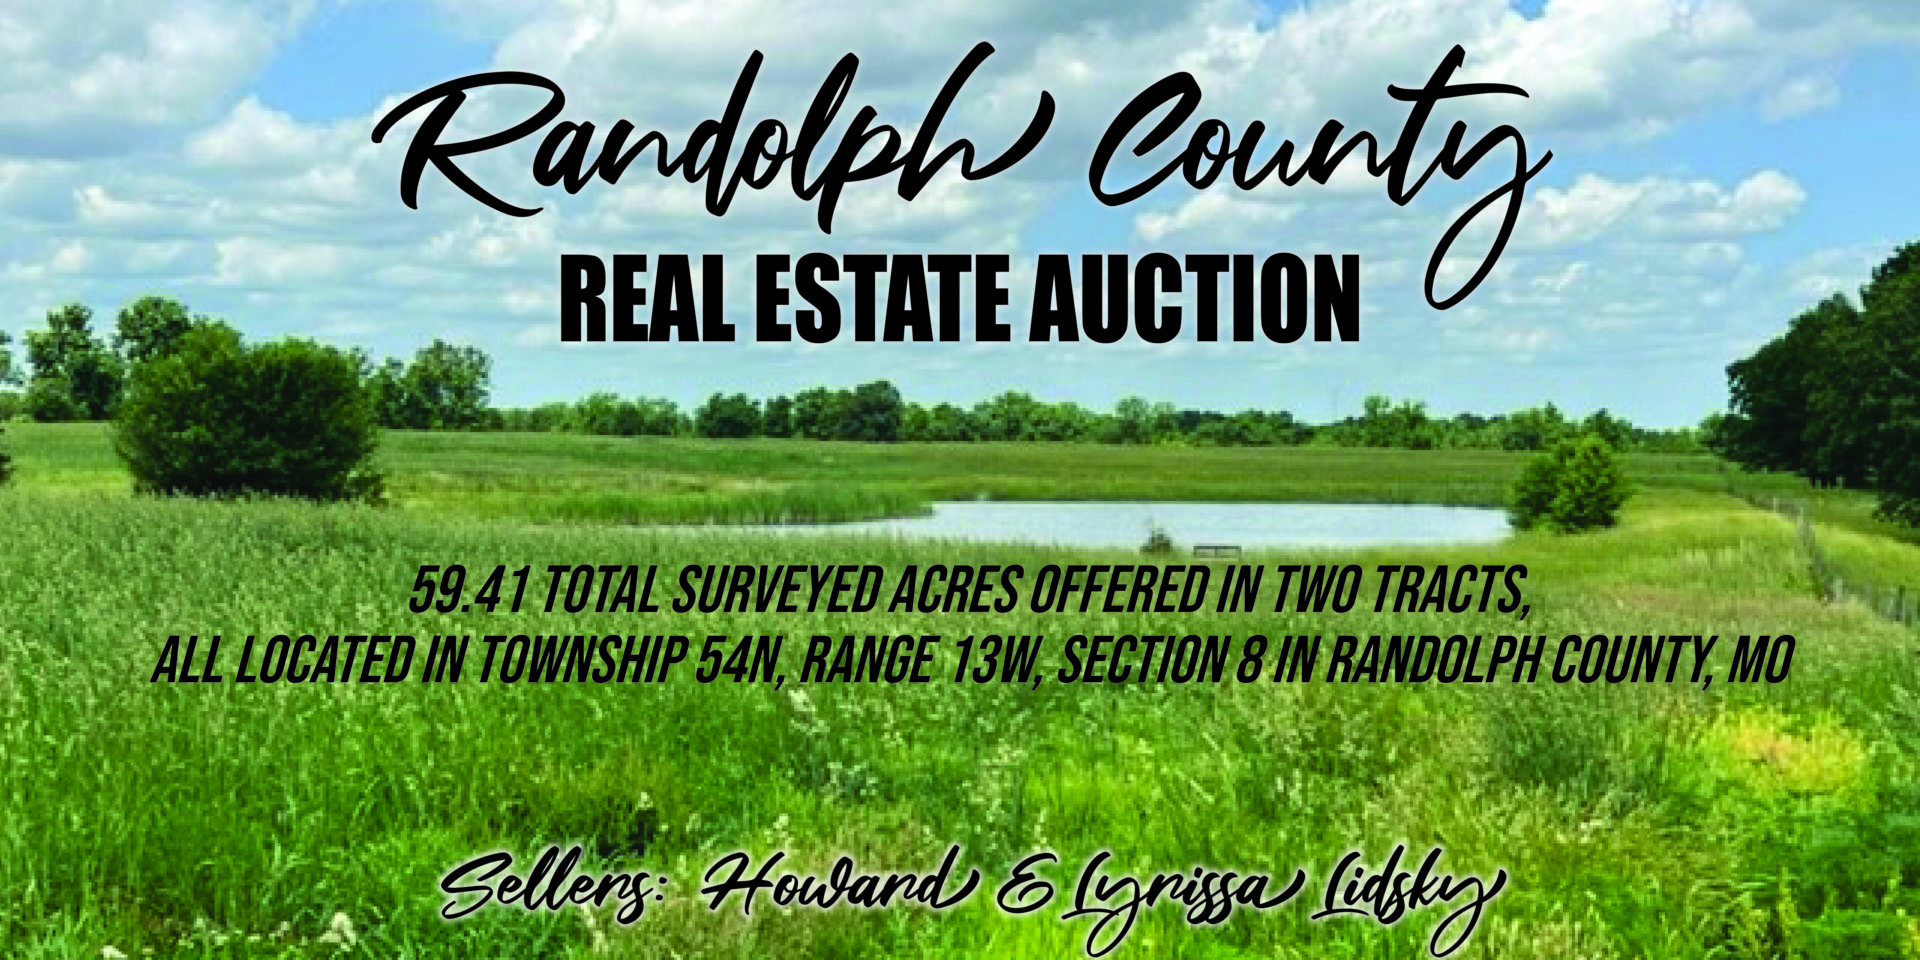 Randolph County Real Estate Auction